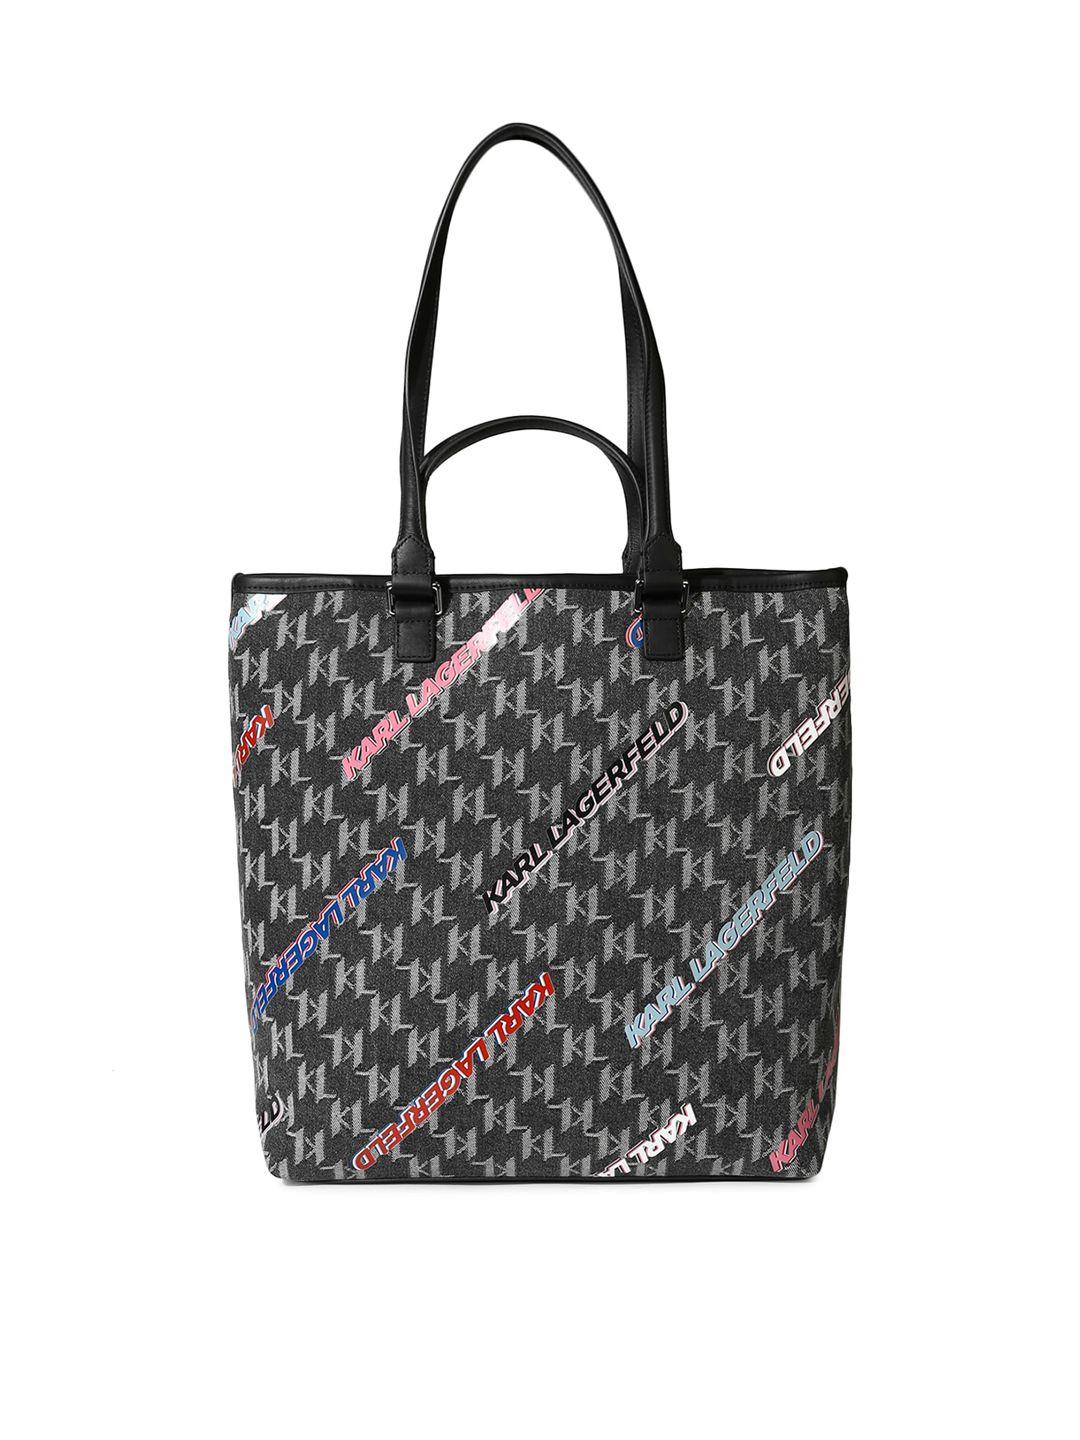 Karl Lagerfeld Black Checked Leather Shopper Tote Bag with Quilted